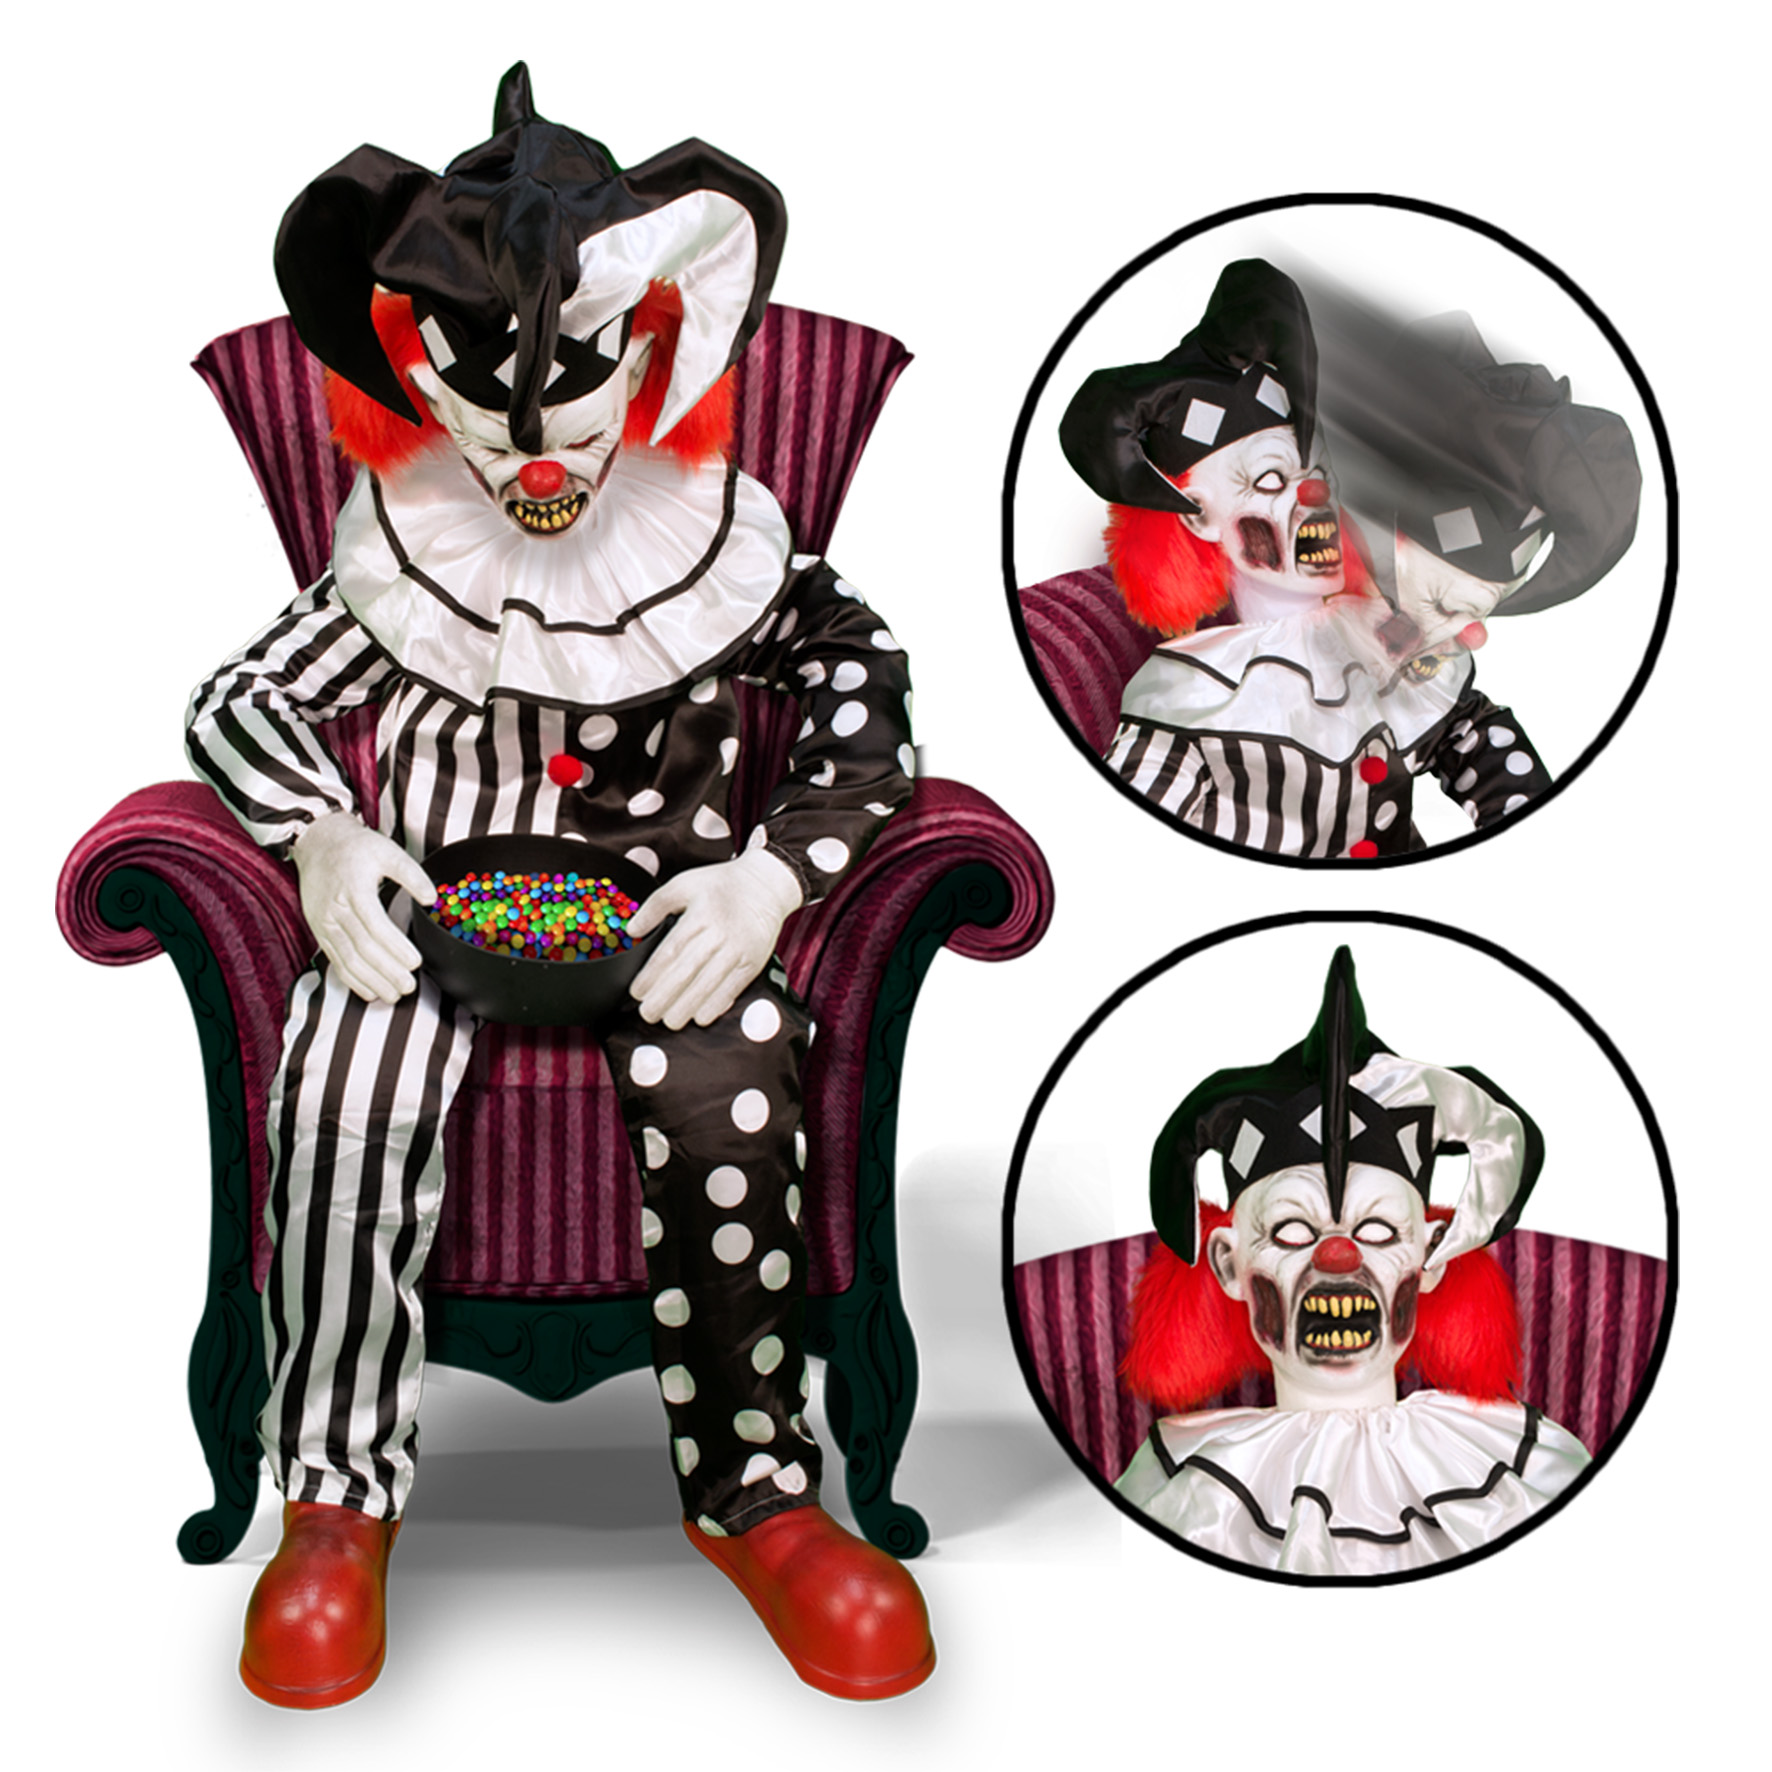 Sitting Scare Clown Animated Prop